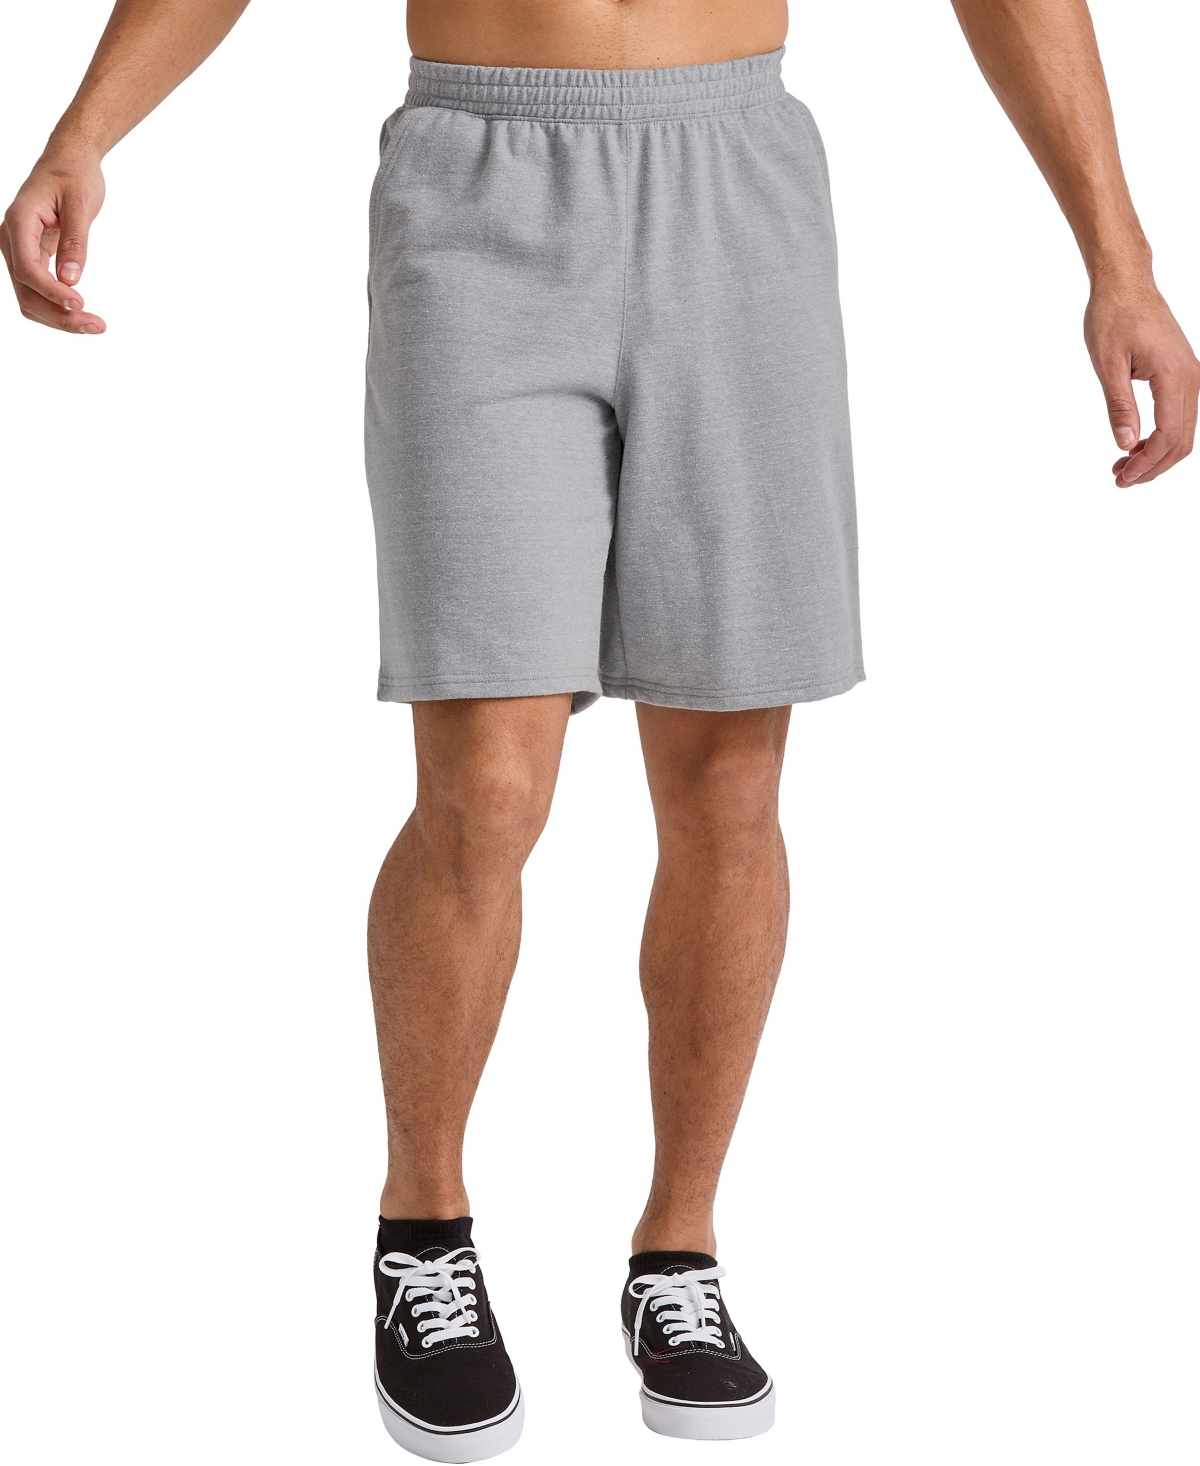 Men's Tri-Blend French Terry Comfort Shorts - Charcoal